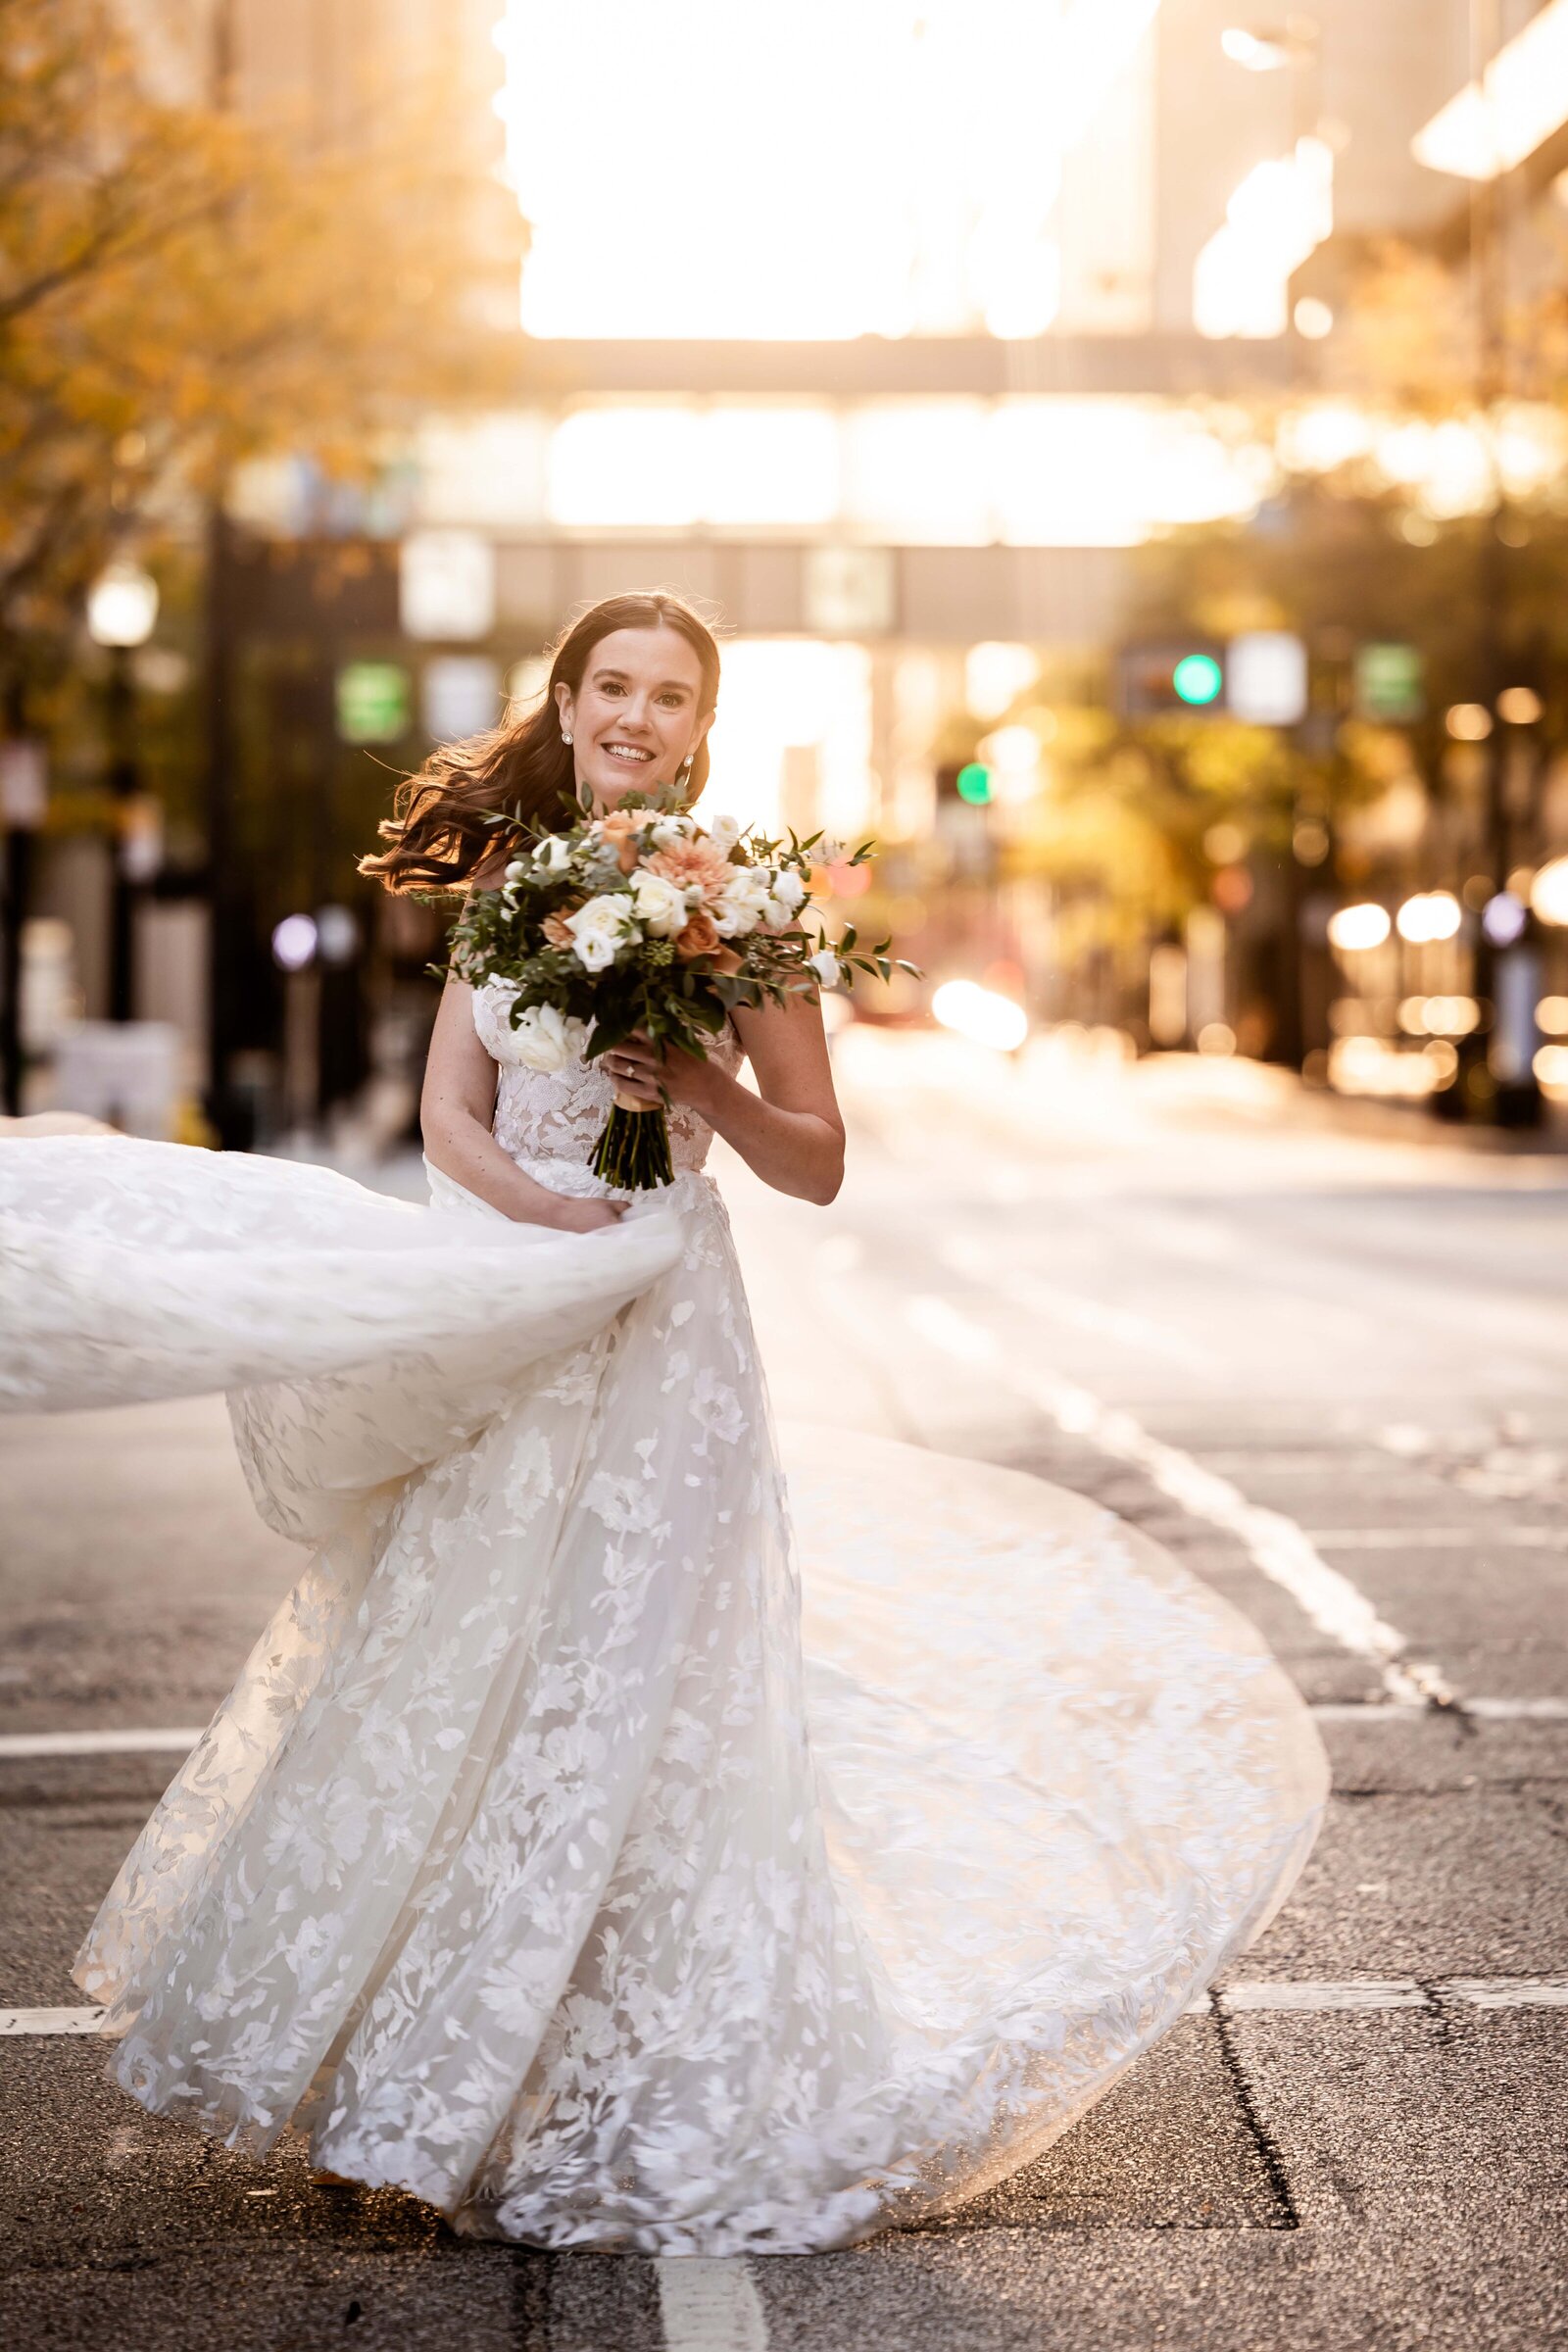 Experience the dynamic beauty of Brooke as she twirls through the streets of Downtown Cincinnati, her dress flowing with stunning movement. This captivating image captures the joy and freedom of her dance, set against the urban backdrop of the city's vibrant streets. Ideal for those seeking unique wedding photography ideas that incorporate dramatic dress movement and urban charm, this photo demonstrates how a bride can truly shine in a non-traditional setting.